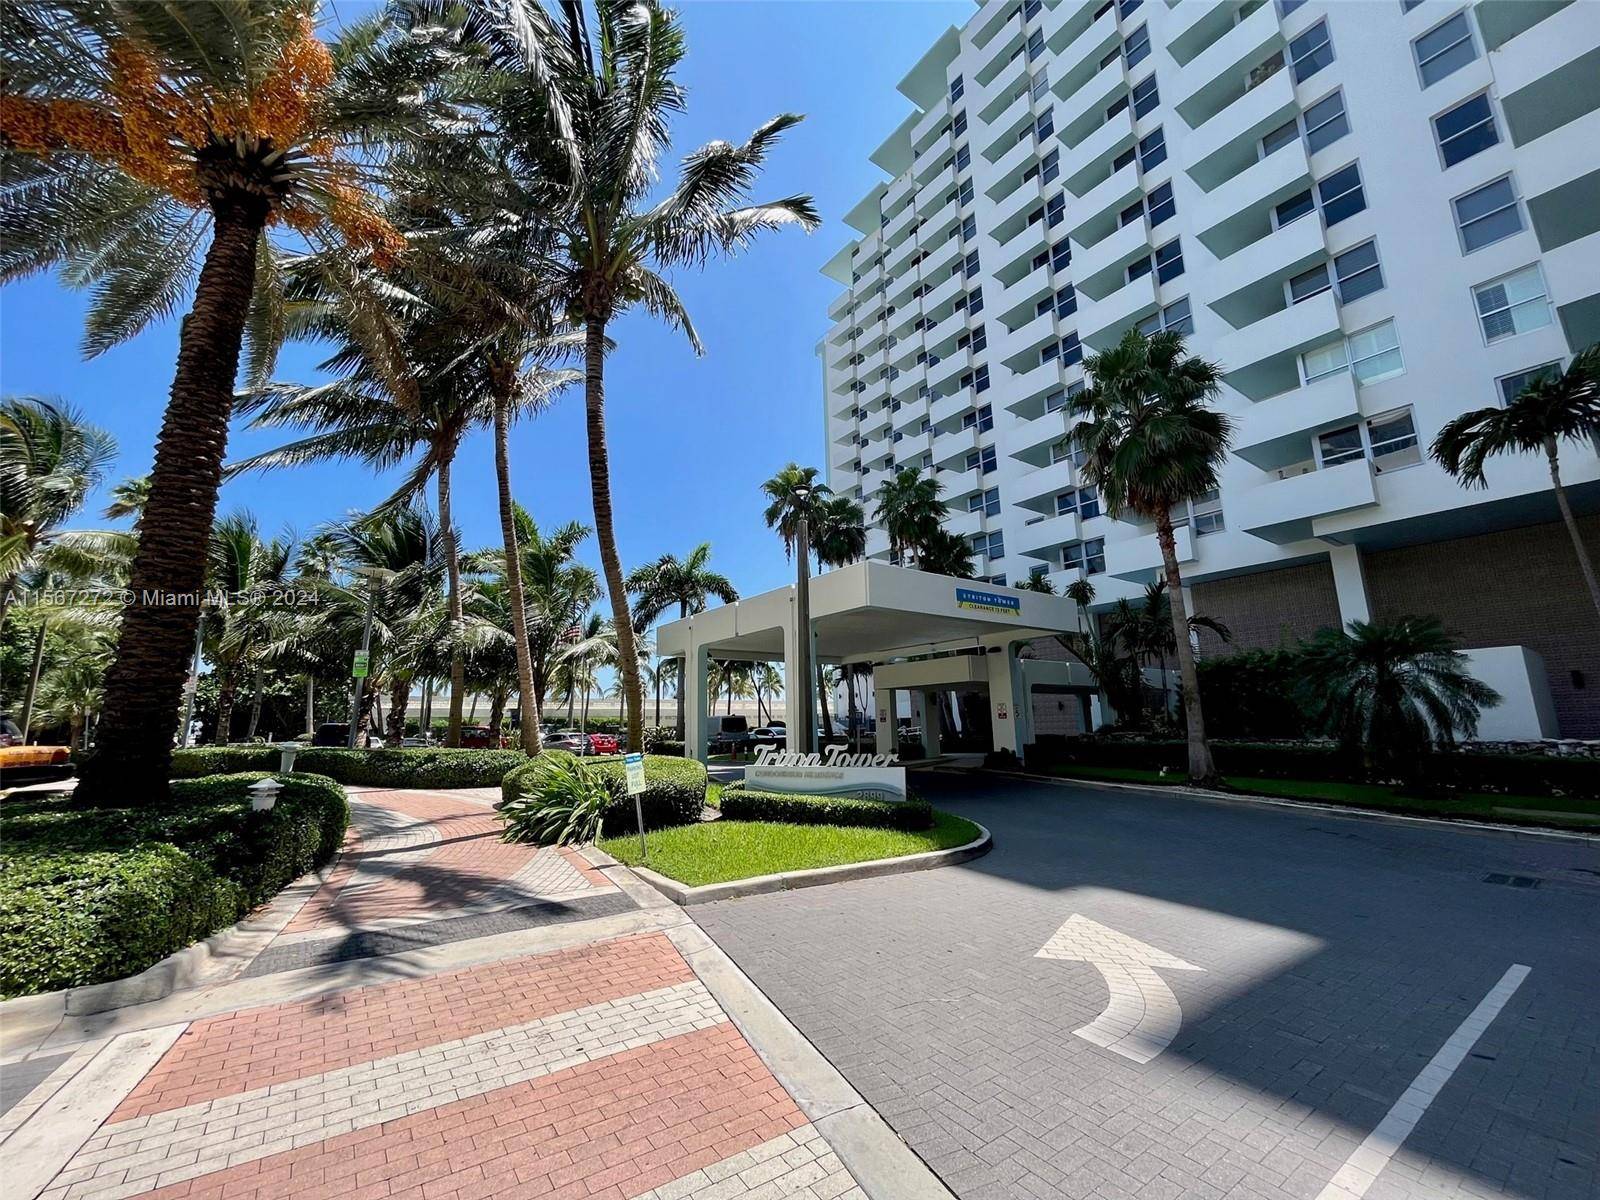 Wonderful Size studio with balcony facing the ocean, Excellent location in Mid Beach Next to the EDITION Hotel.